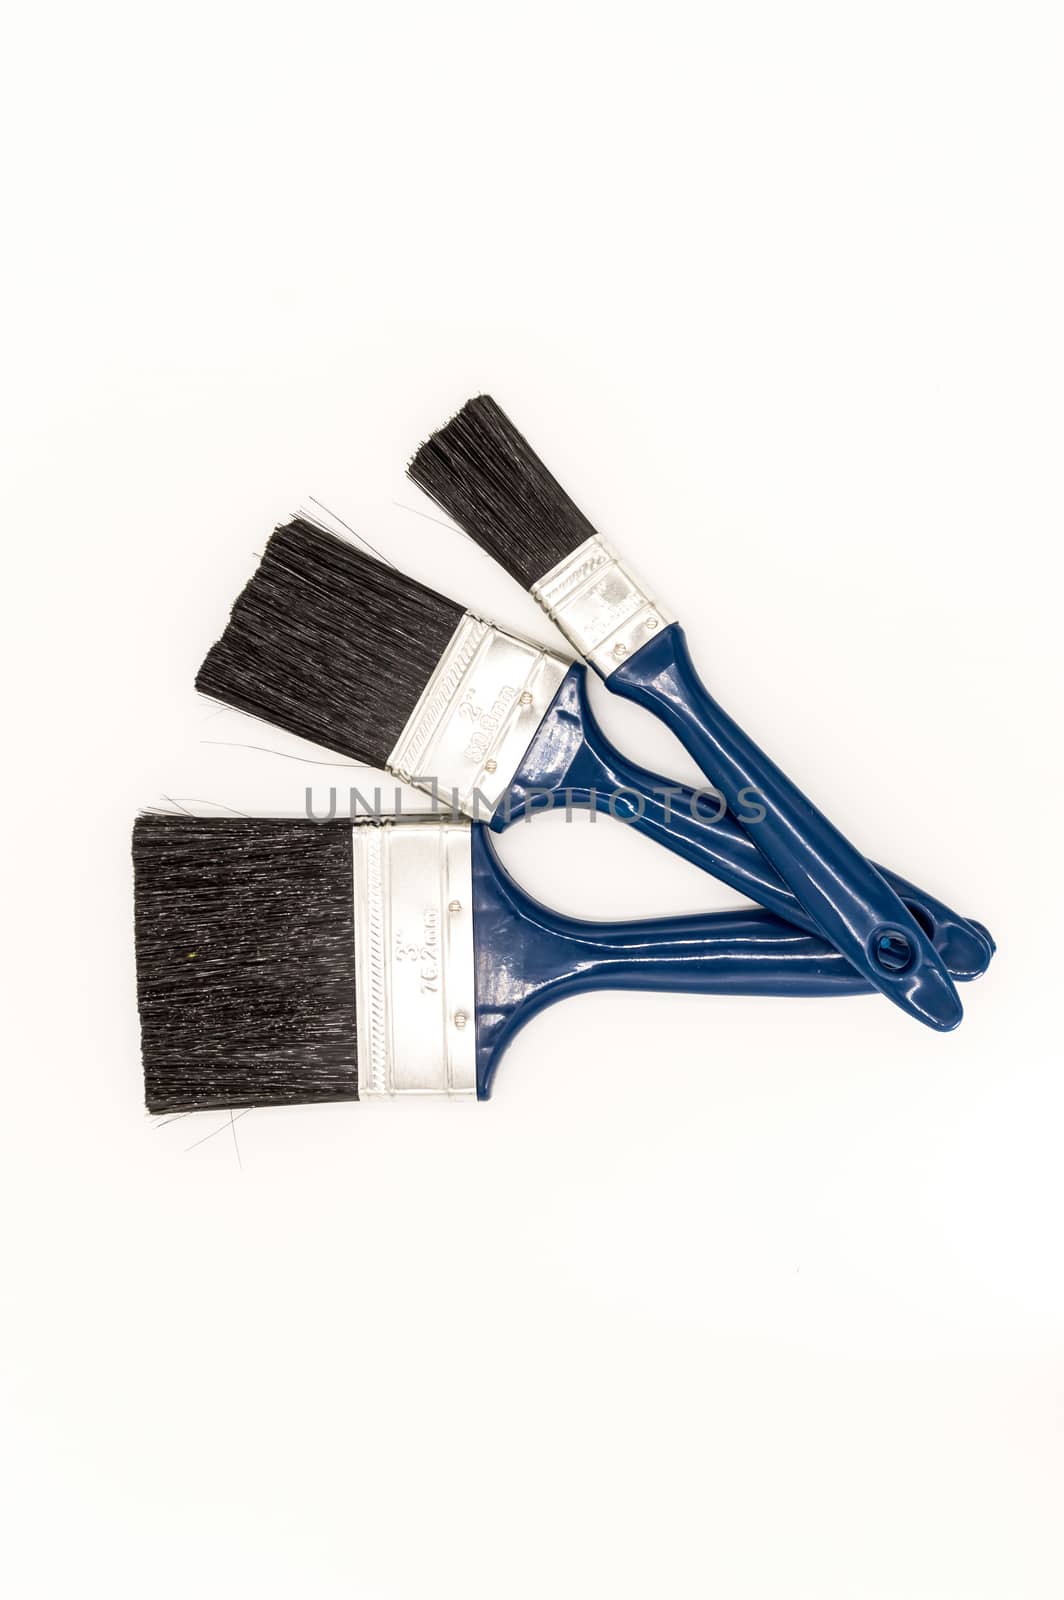 Three paint brushes with blue colored handles on an isolated white background